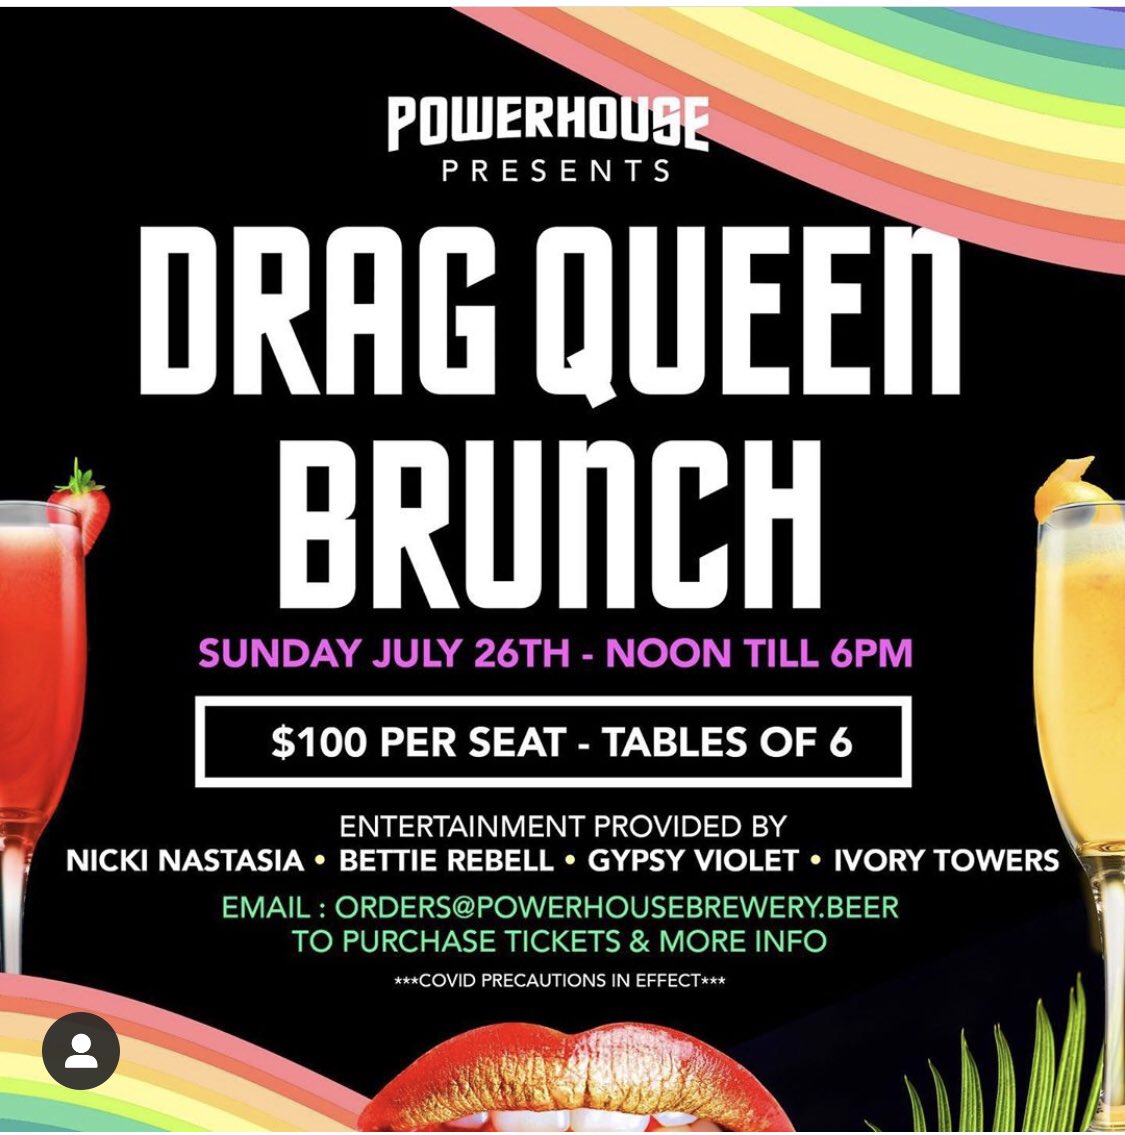 #PowerhouseBrewery at 100 Kellogg is hosting its first ever #DragBrunch on July 26th from 12-6 in their big courtyard. Includes 3 course brunch and Caesar or Mimosa bar for table!Book your tickets today as limited seating. Sickening, entertaint-ting, gooped and gagged! 💃🏼🌈👑